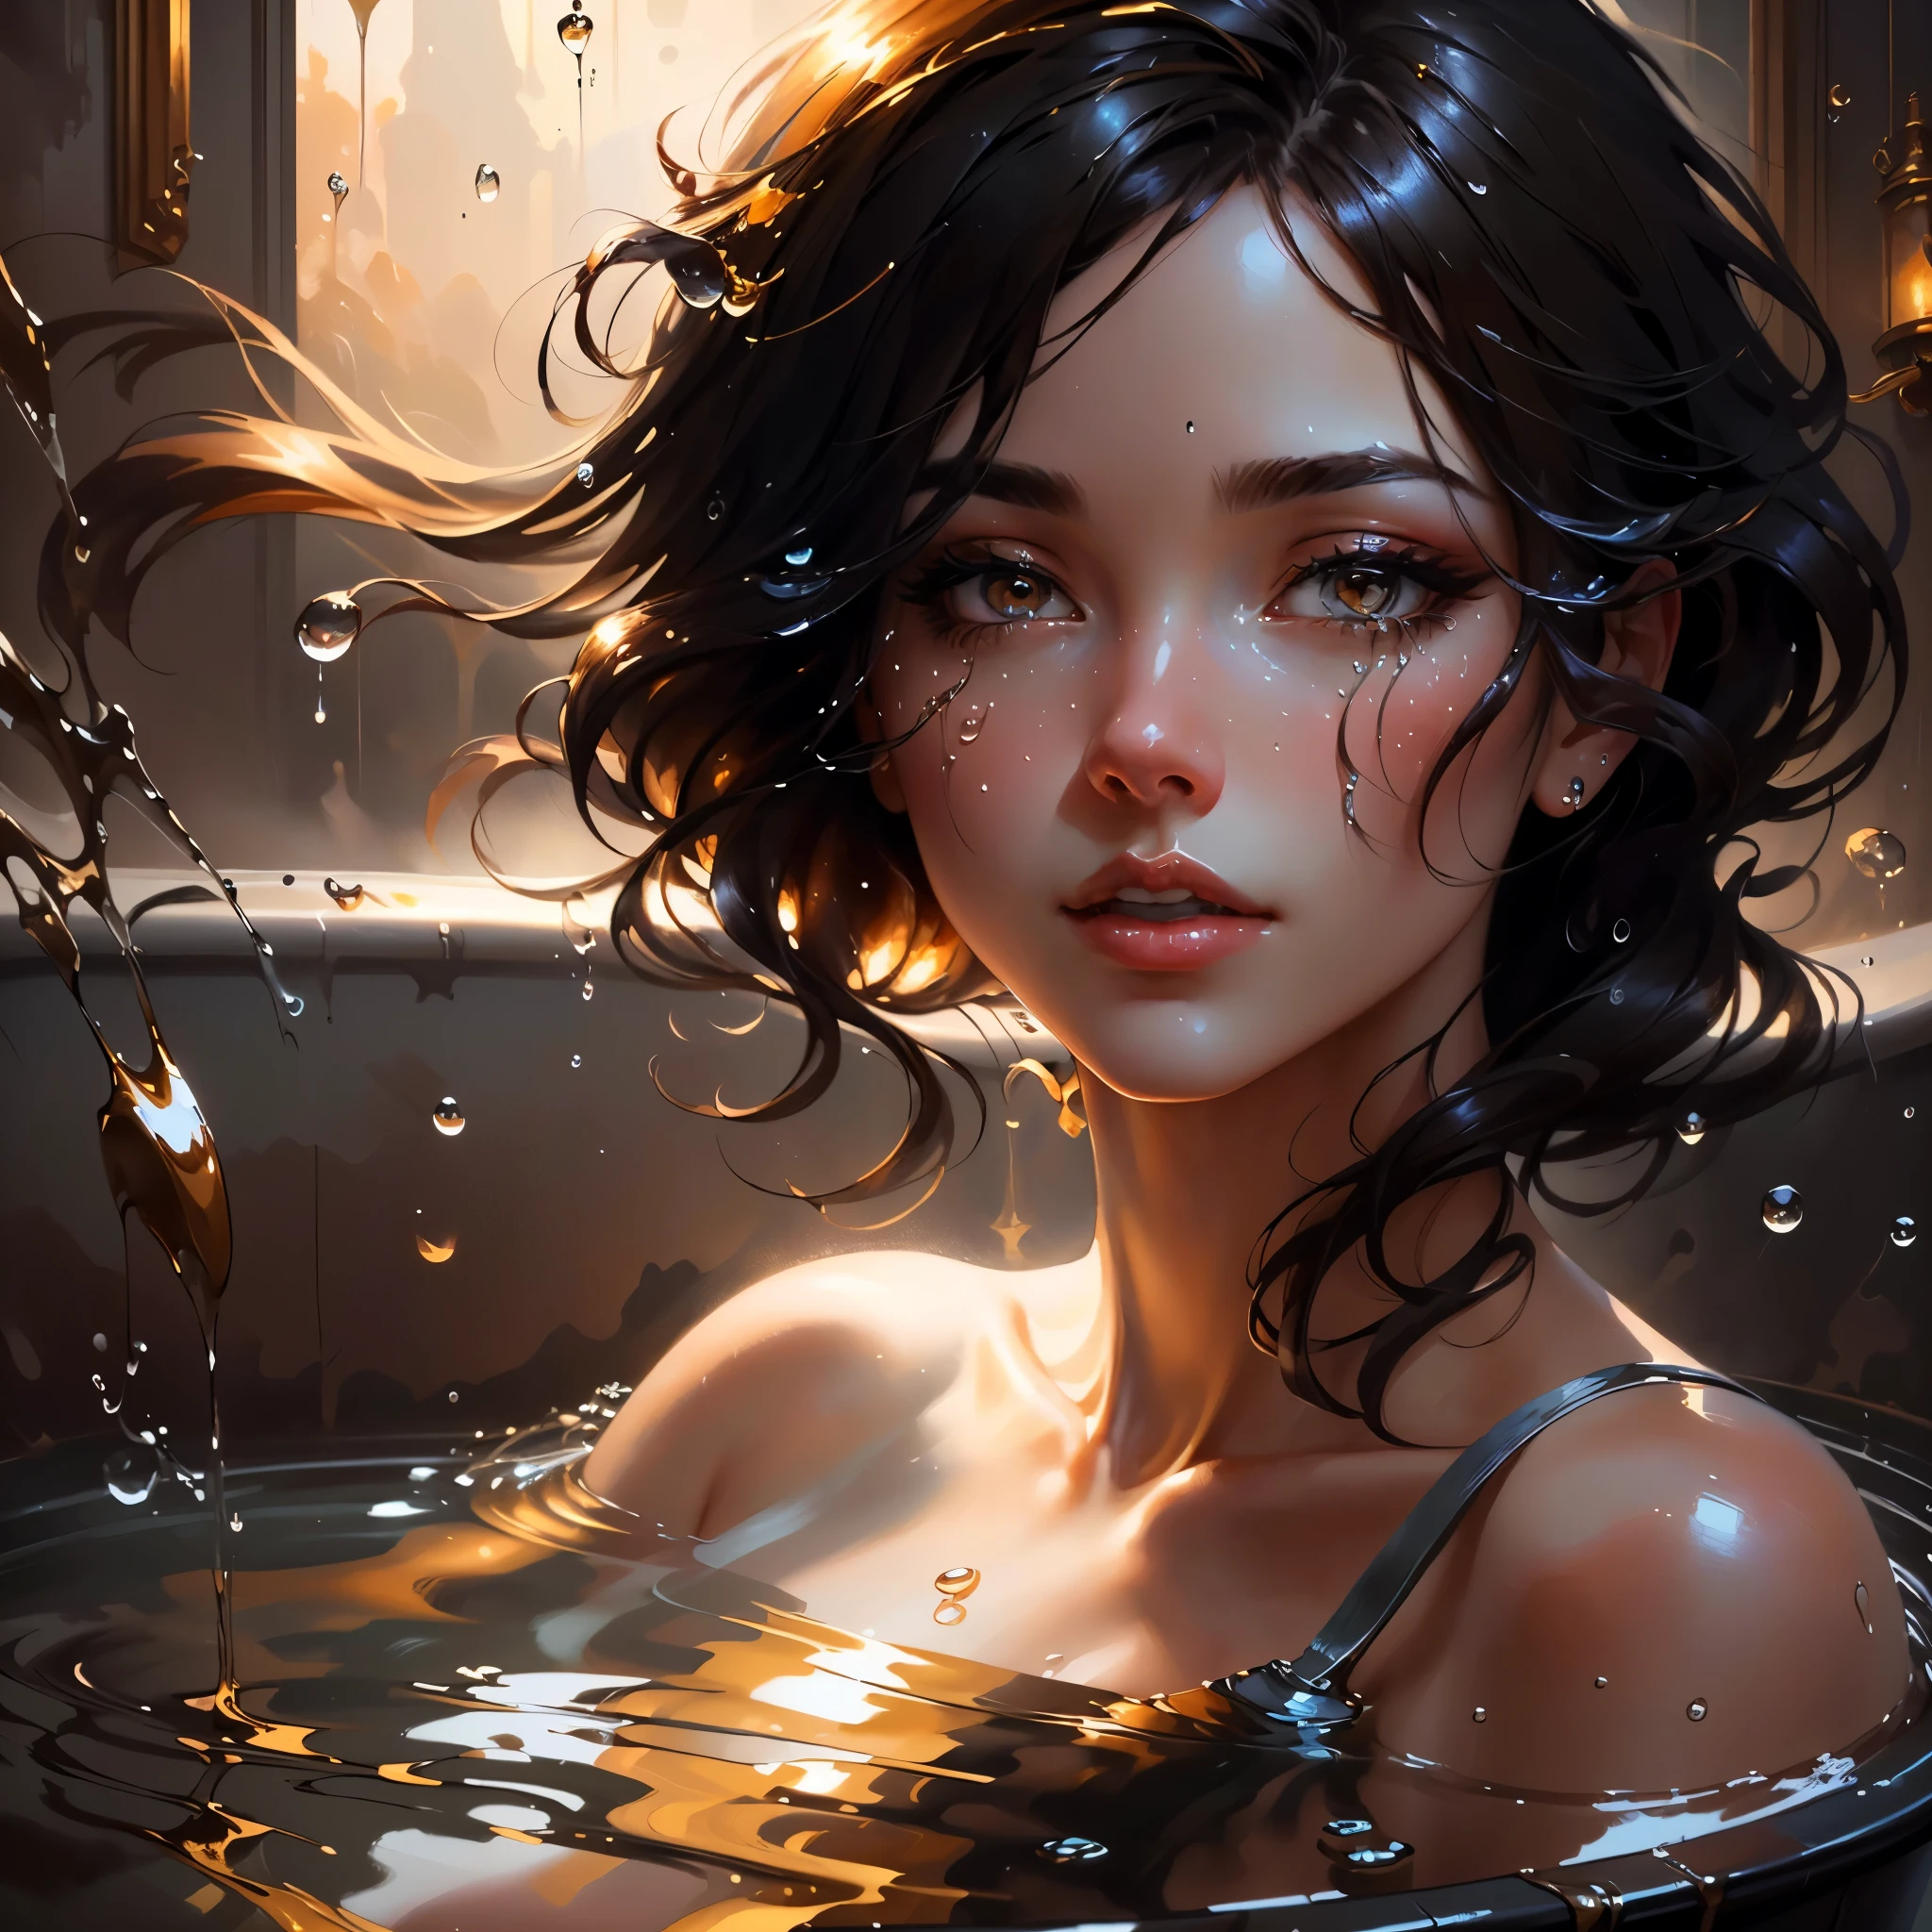 a close up of a woman in a bathtub with water droplets, golden water droplets, oil painting, brush strokes, beautiful detailed painting 4k, beautiful art uhd 4k, glossy digital painting, gorgeous digital painting, stunning digital illustration